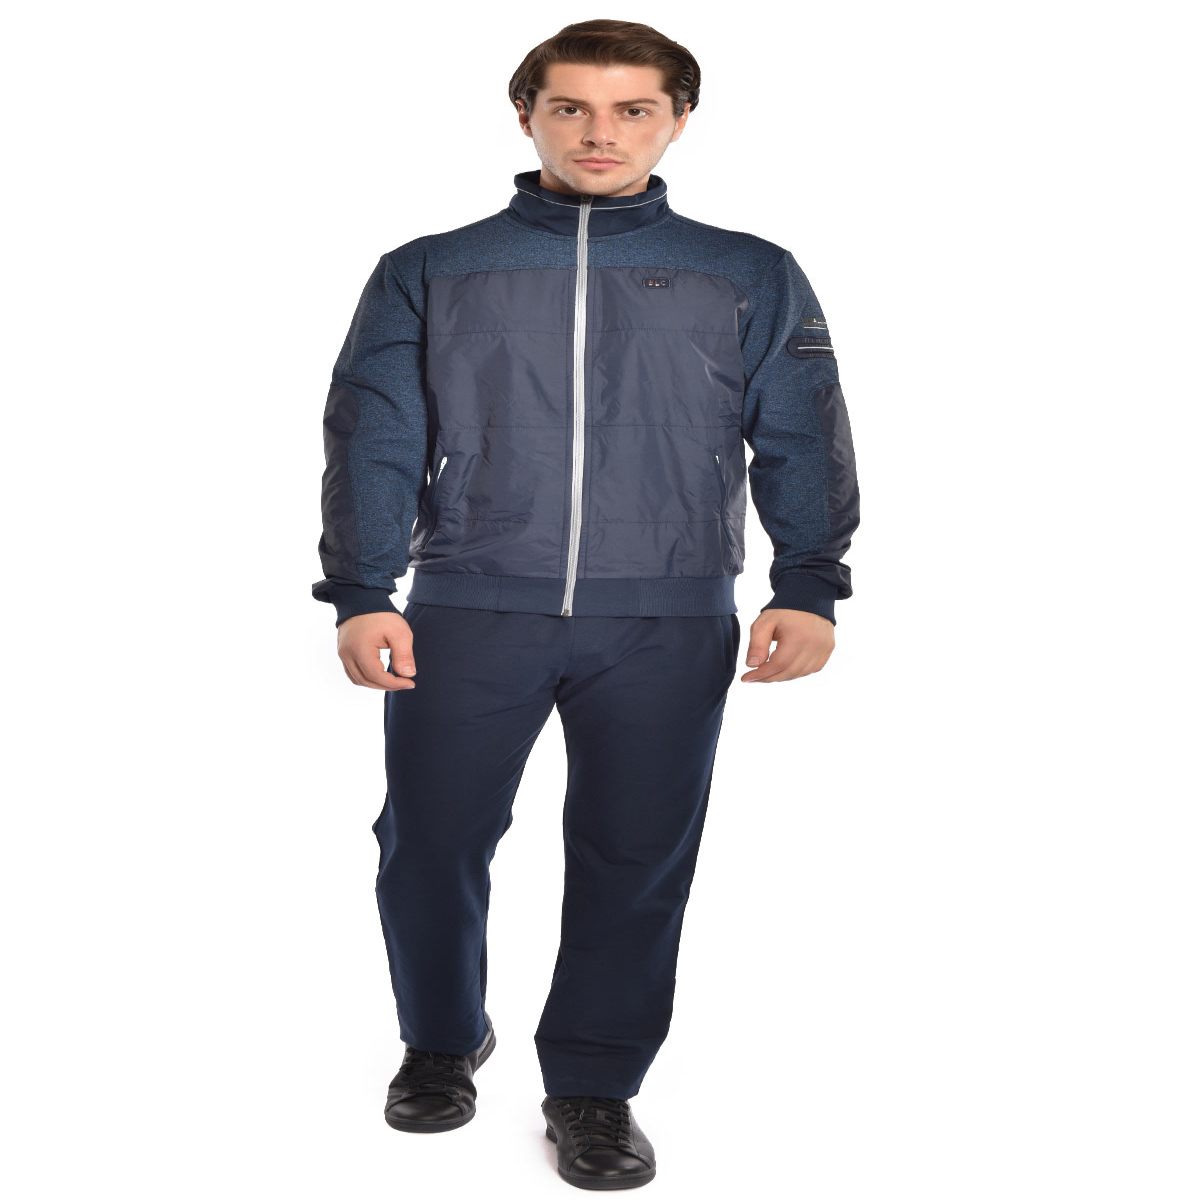 BILCEE MEN'S TRACKSUIT FOR TRANING-18MA01W9417-1-2165